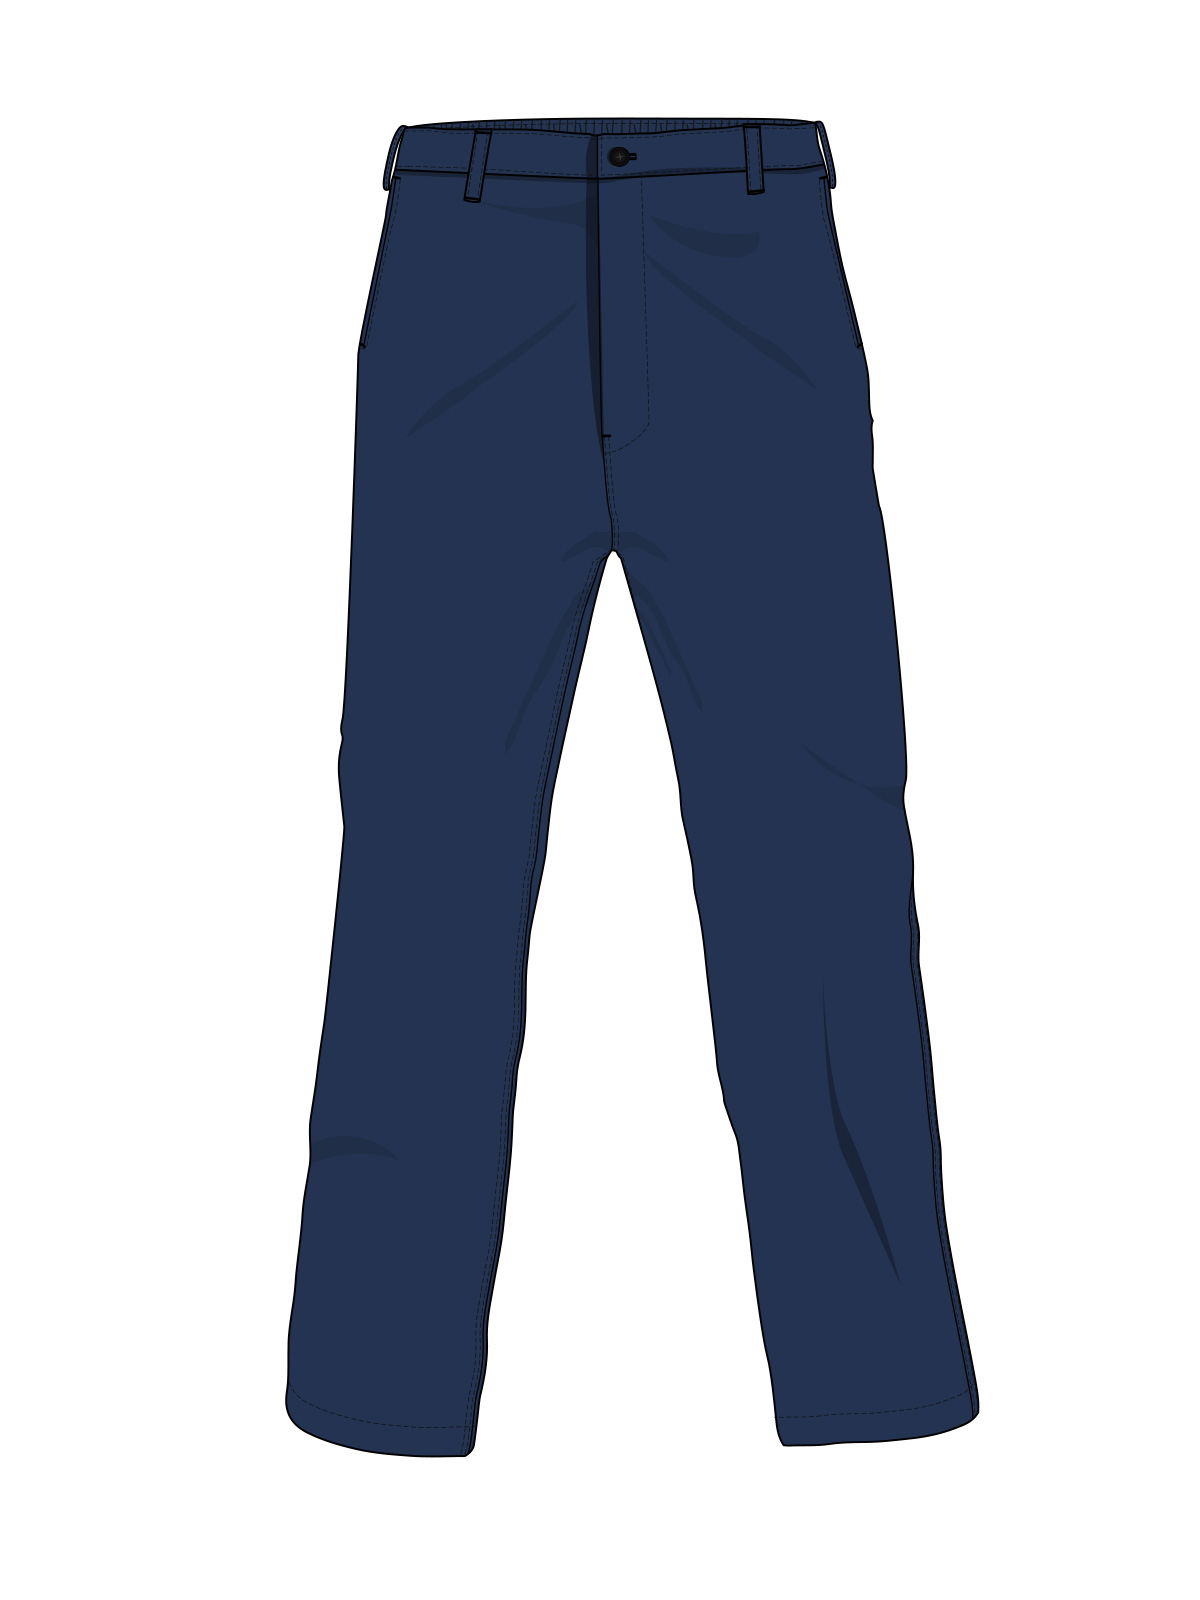 Alsaf Fire Resistant Trousers